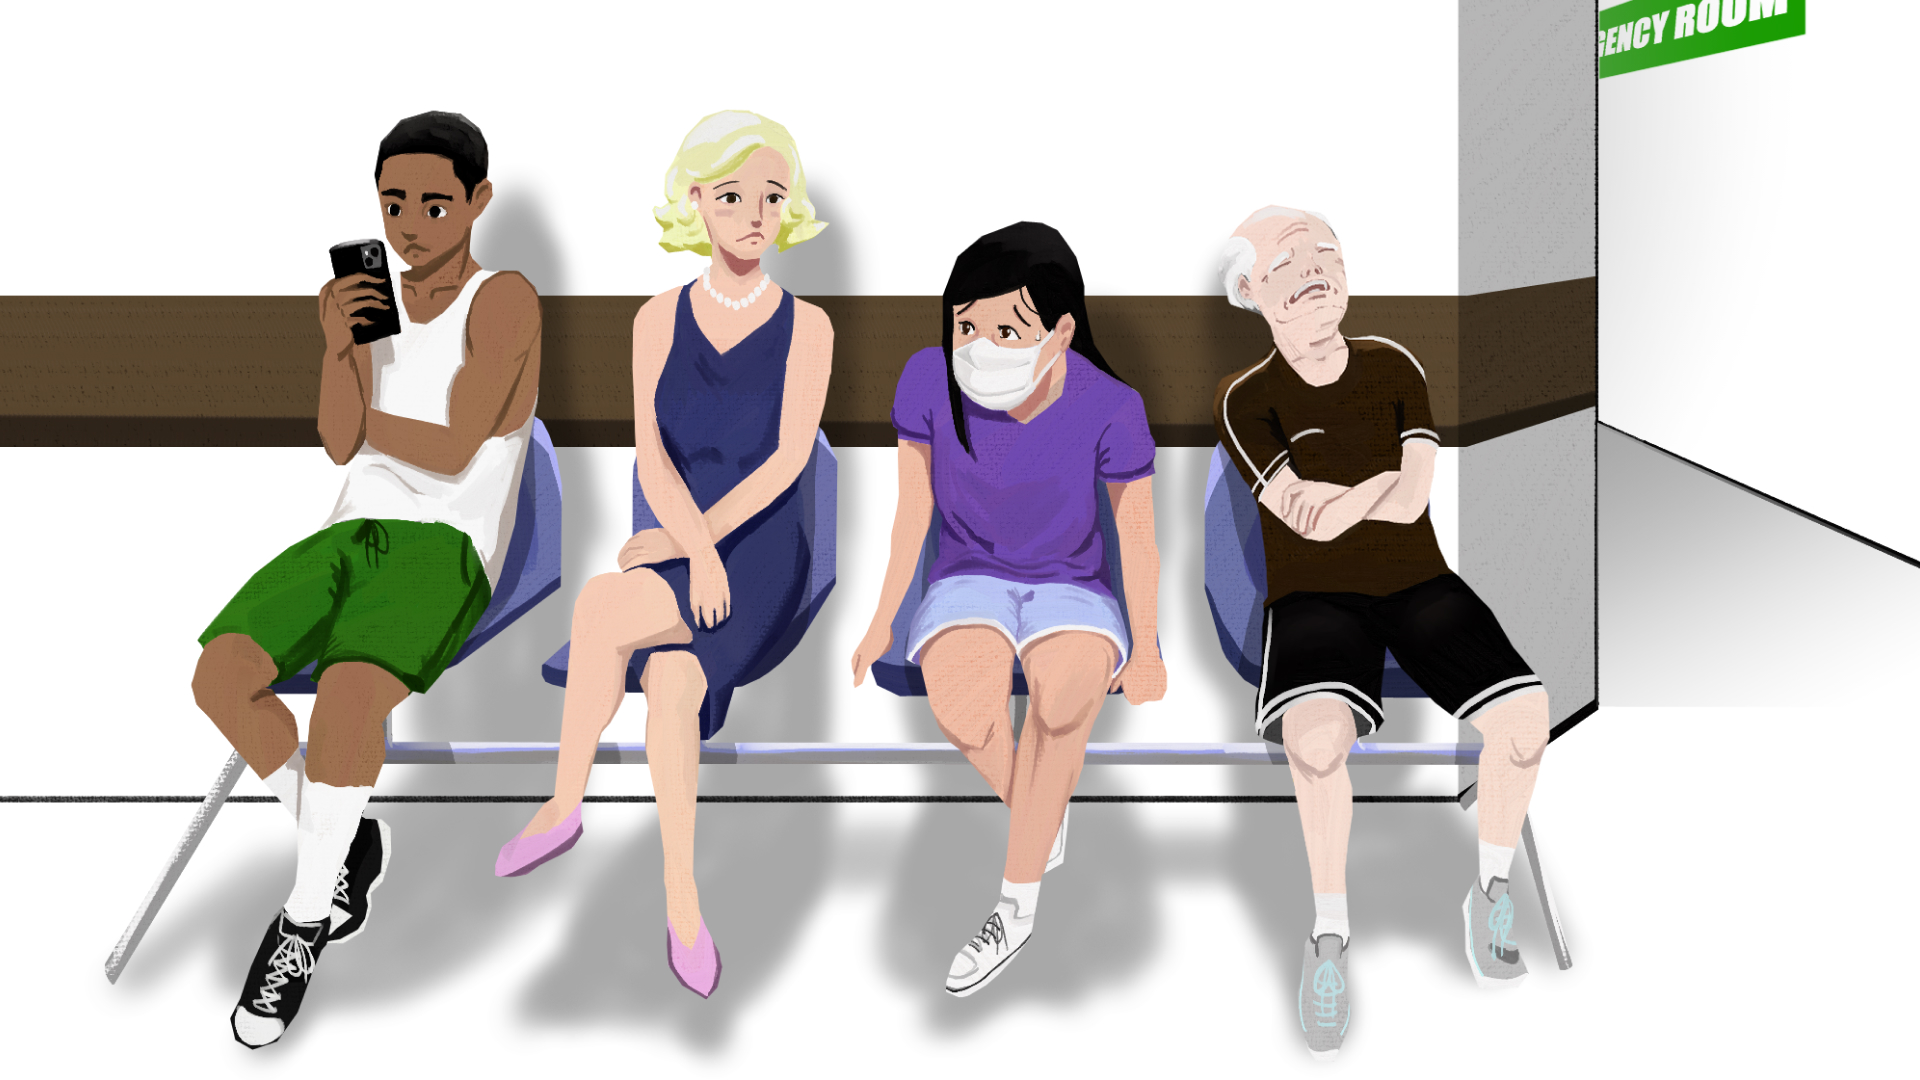 Illustrated hospital waiting room. Sitting on a bench are four patients, only one of them wearing a mask while displaying a concerned facial expression and body language.